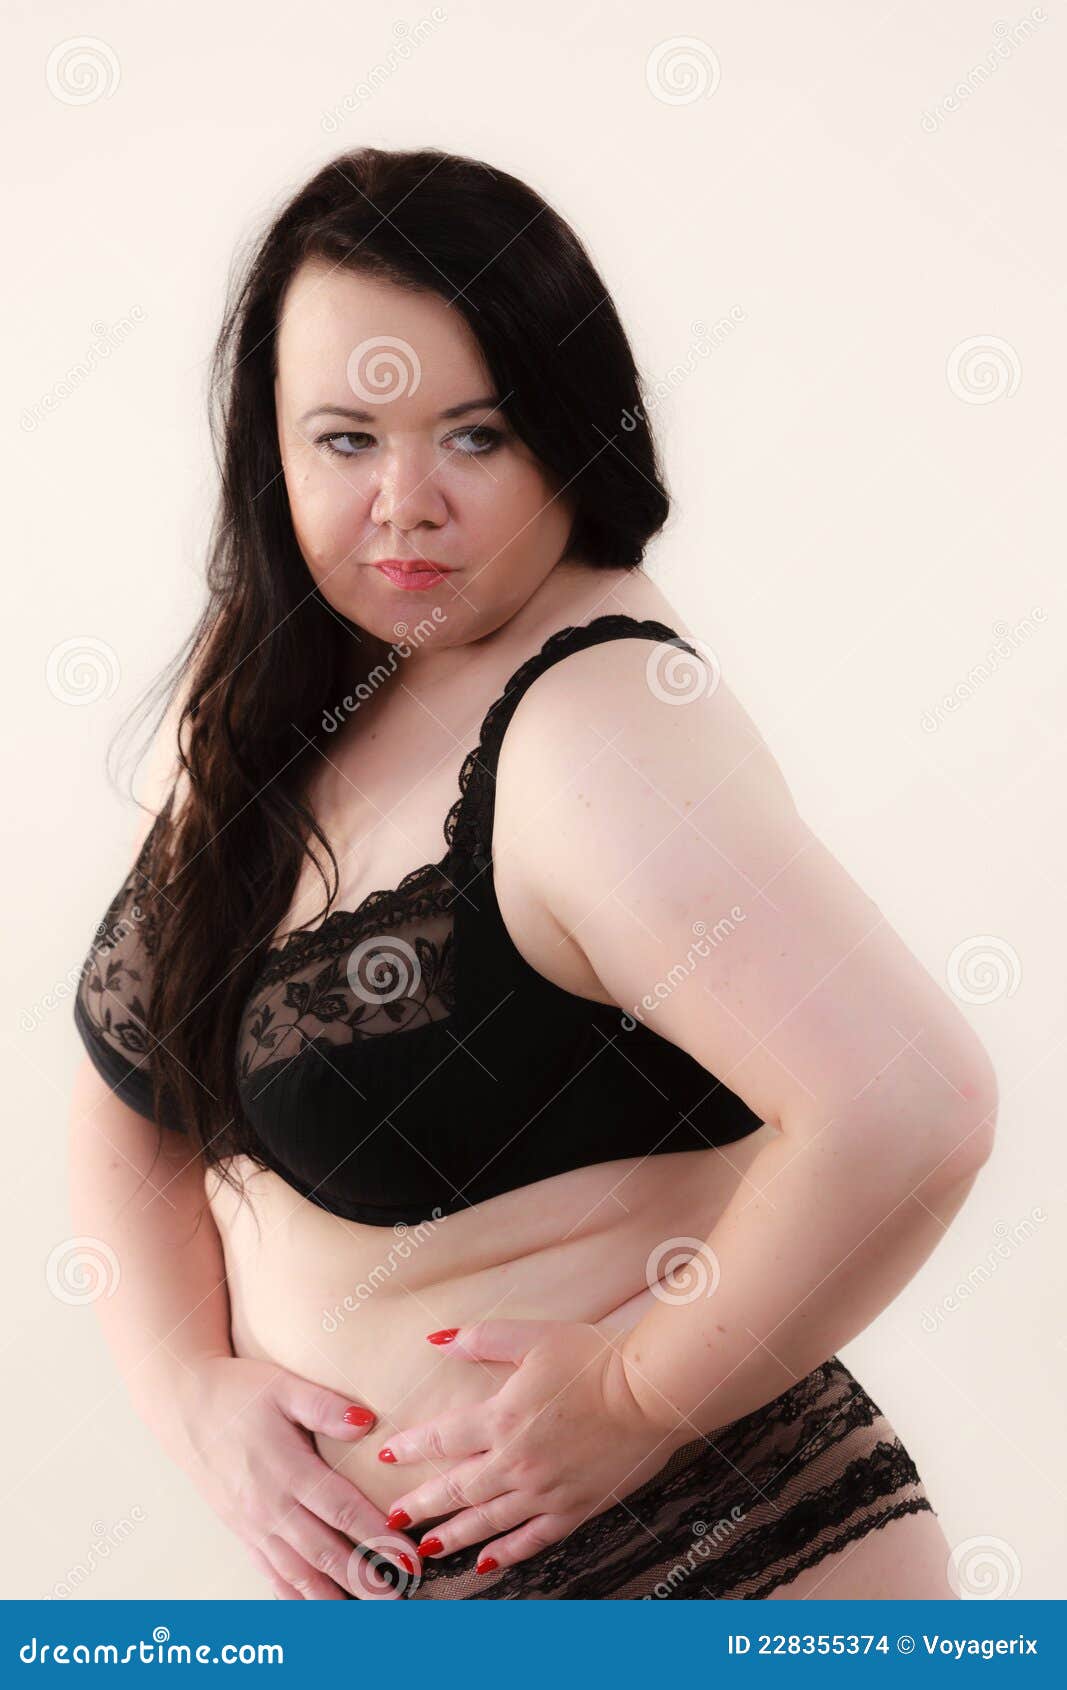 Plus Size Fat Woman in Lingerie Stock Photo - Image of hips